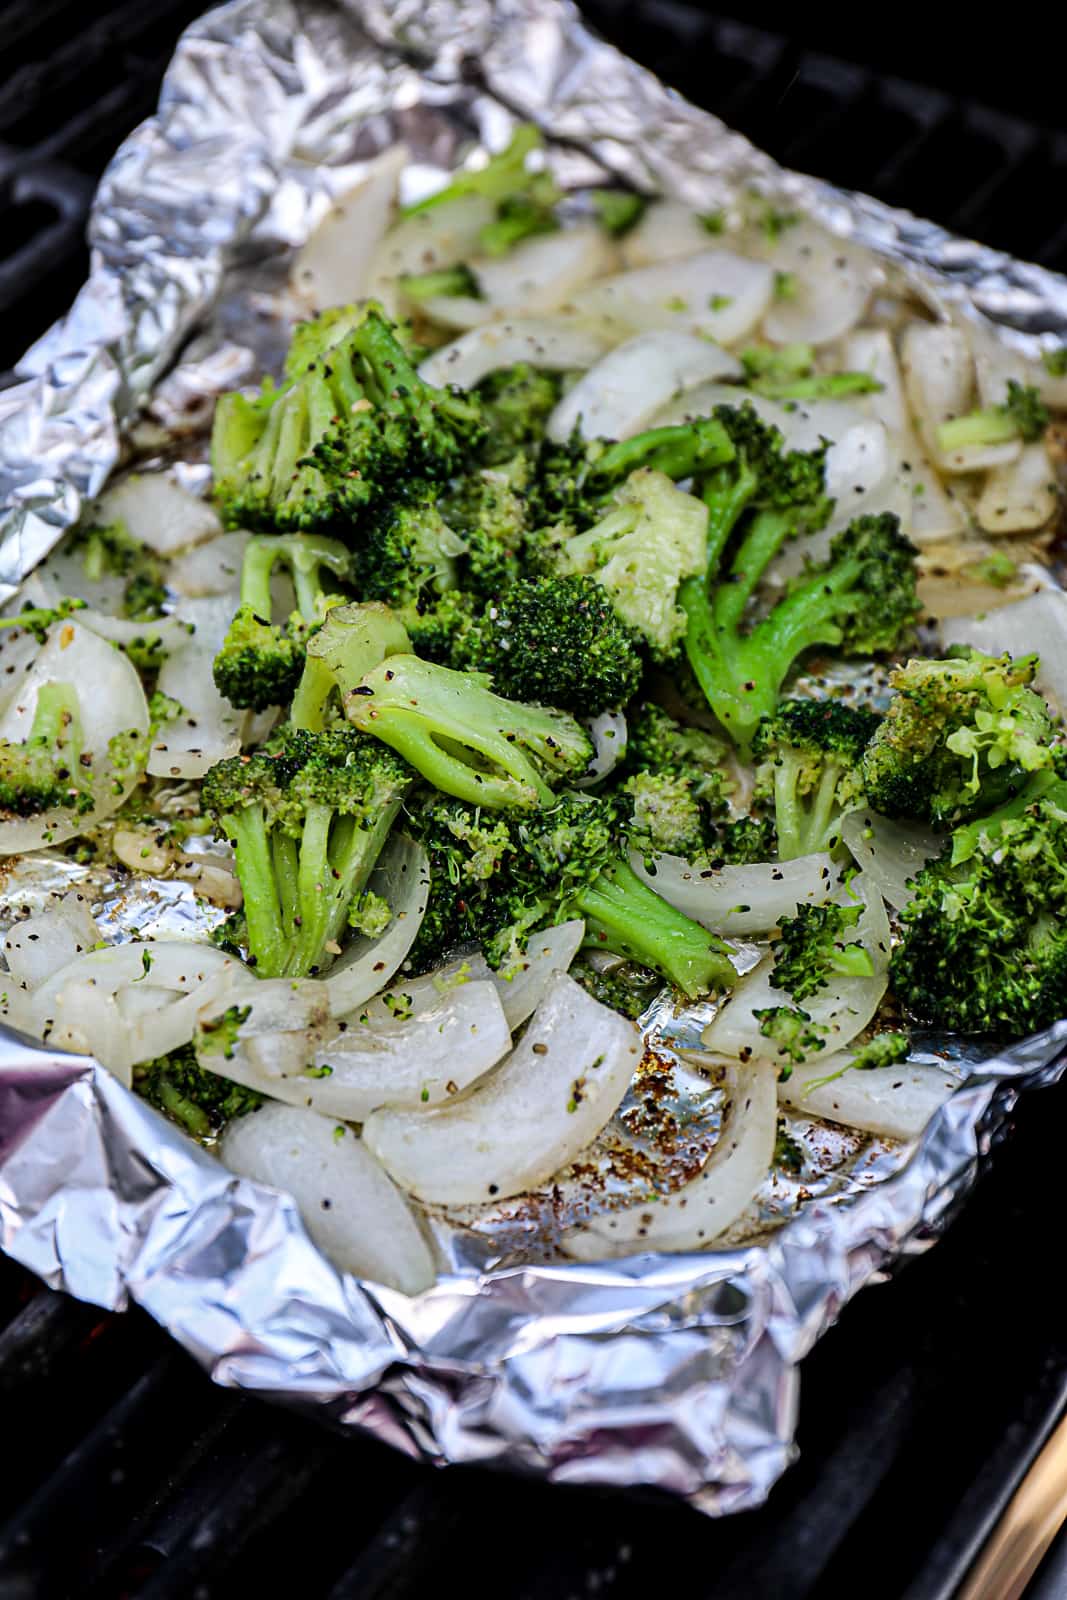 Grilling Broccoli on Foil With Onions